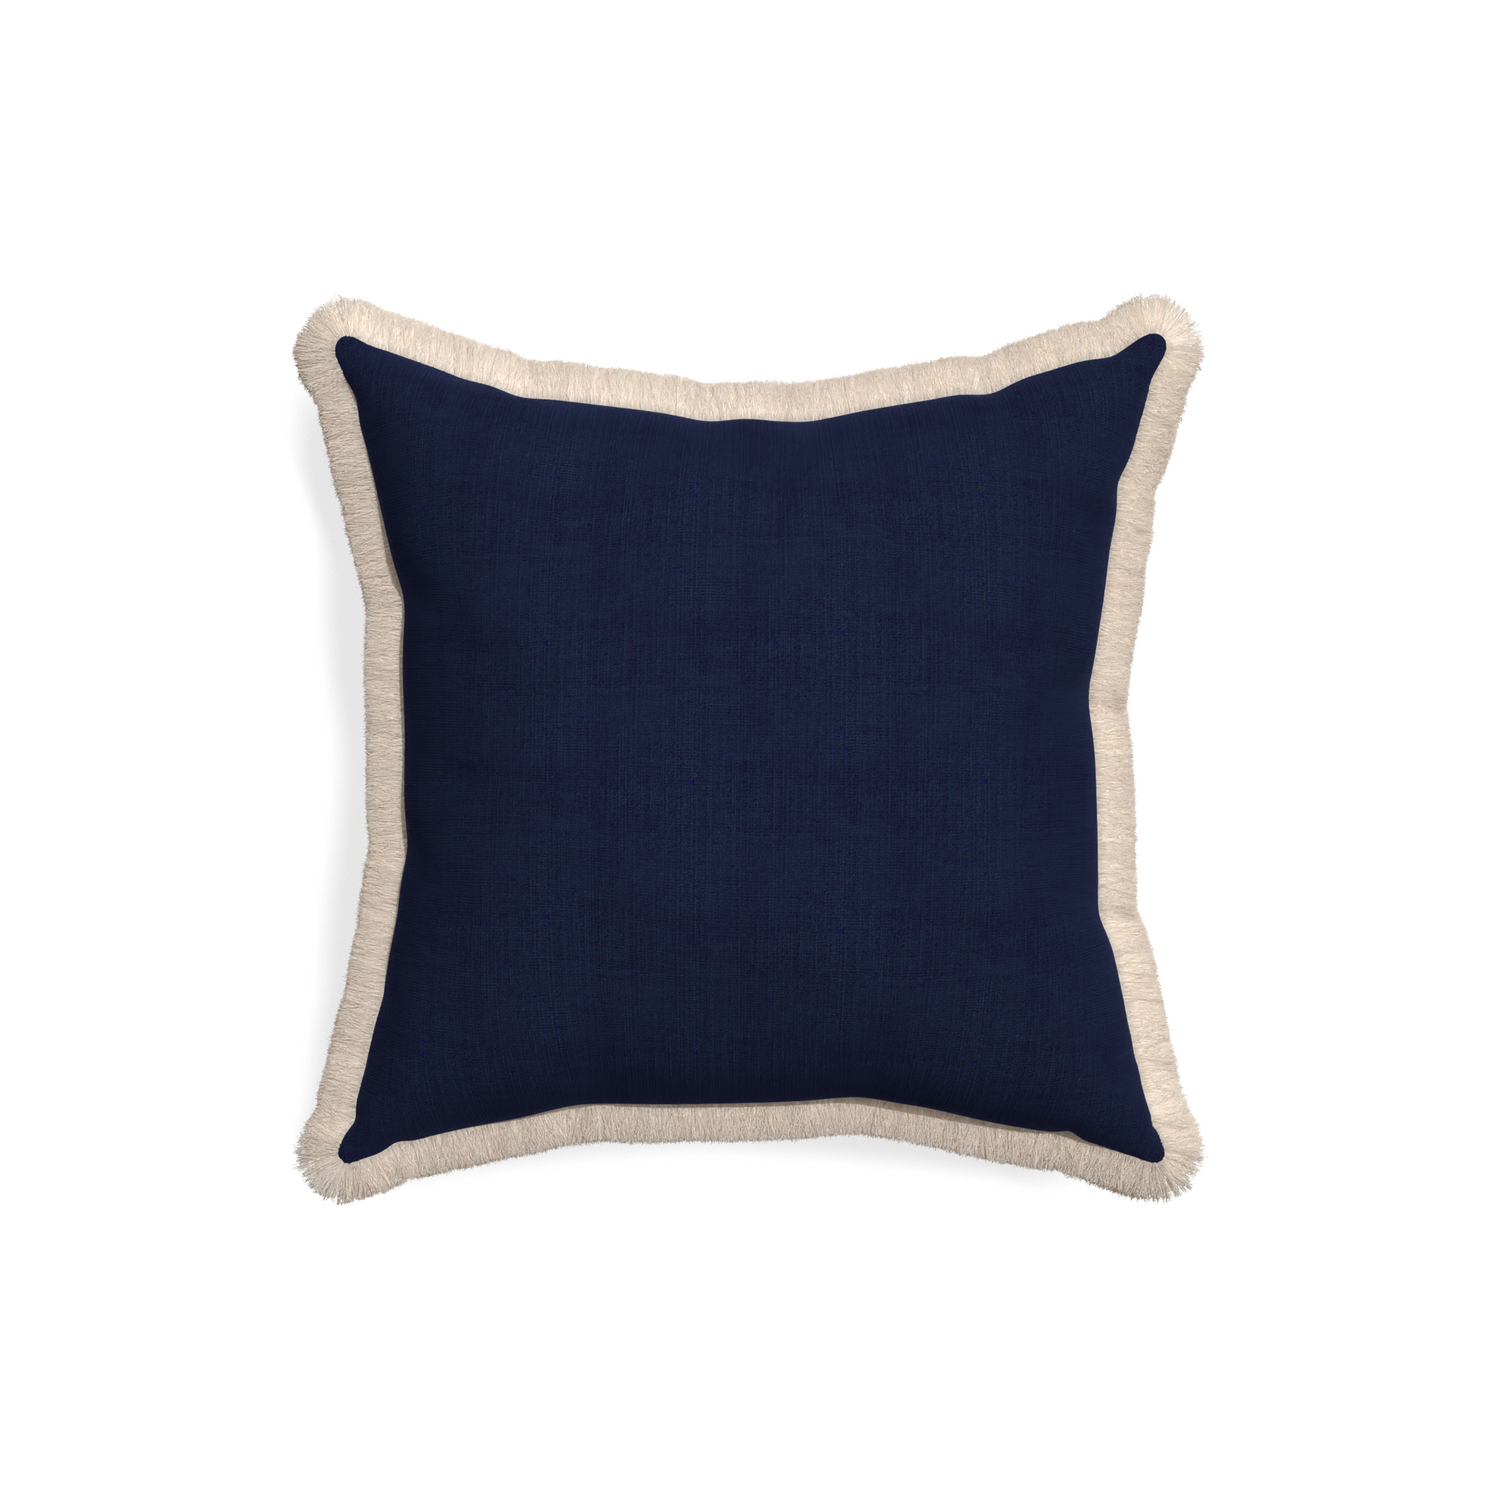 18-square midnight custom navy bluepillow with cream fringe on white background